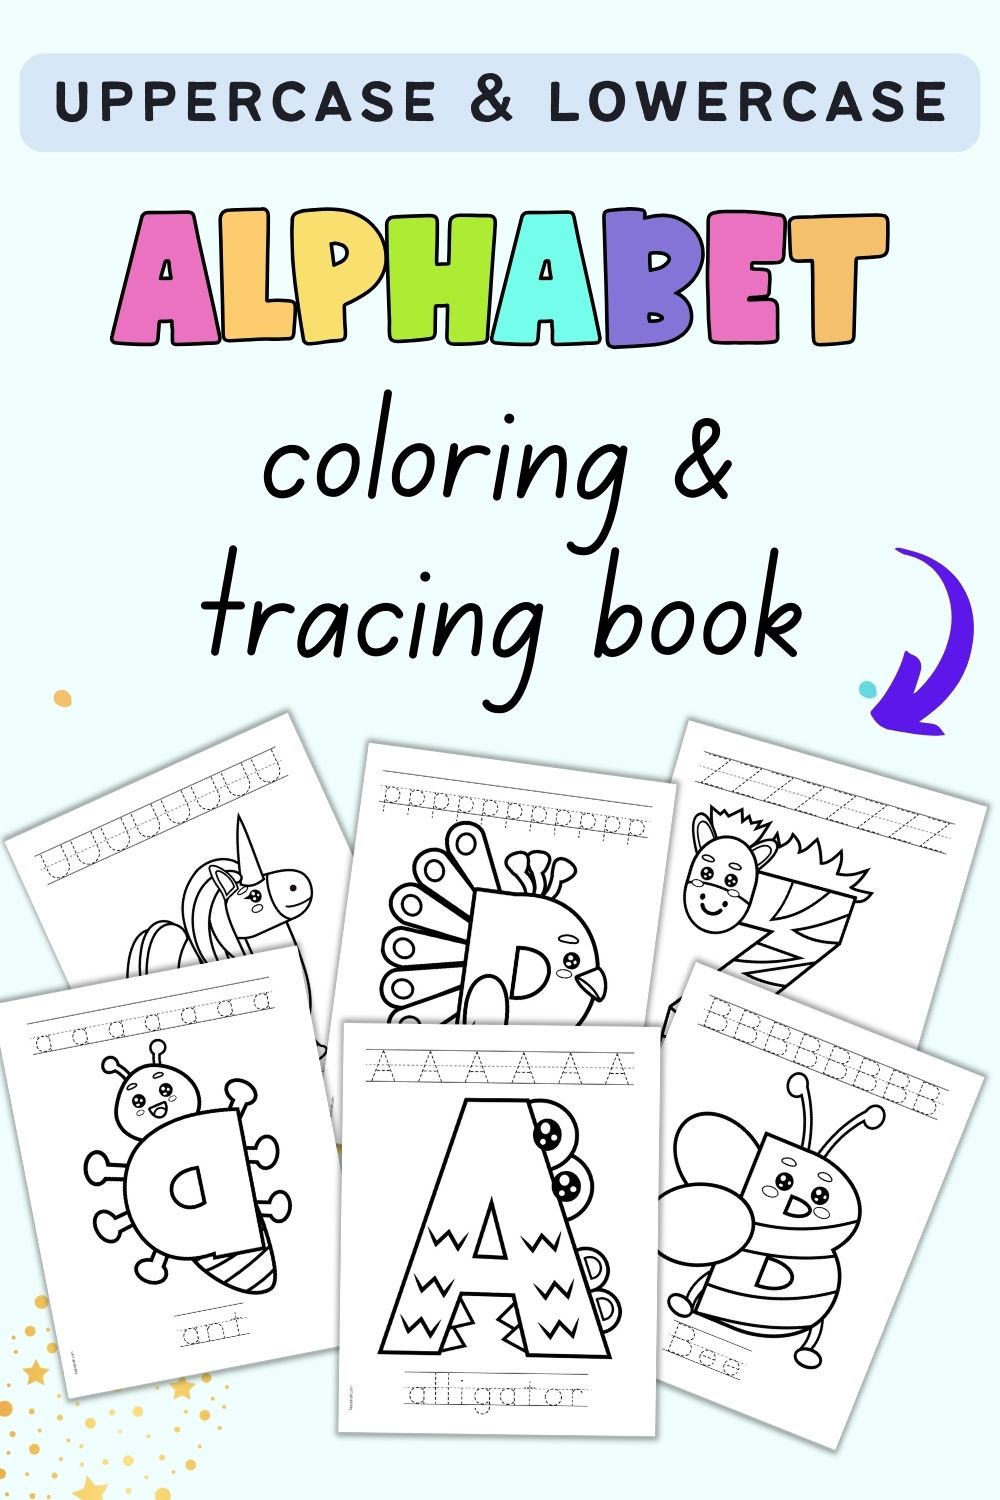 Uppercase & Lowercase Alphabet Tracing & Coloring Pack – The